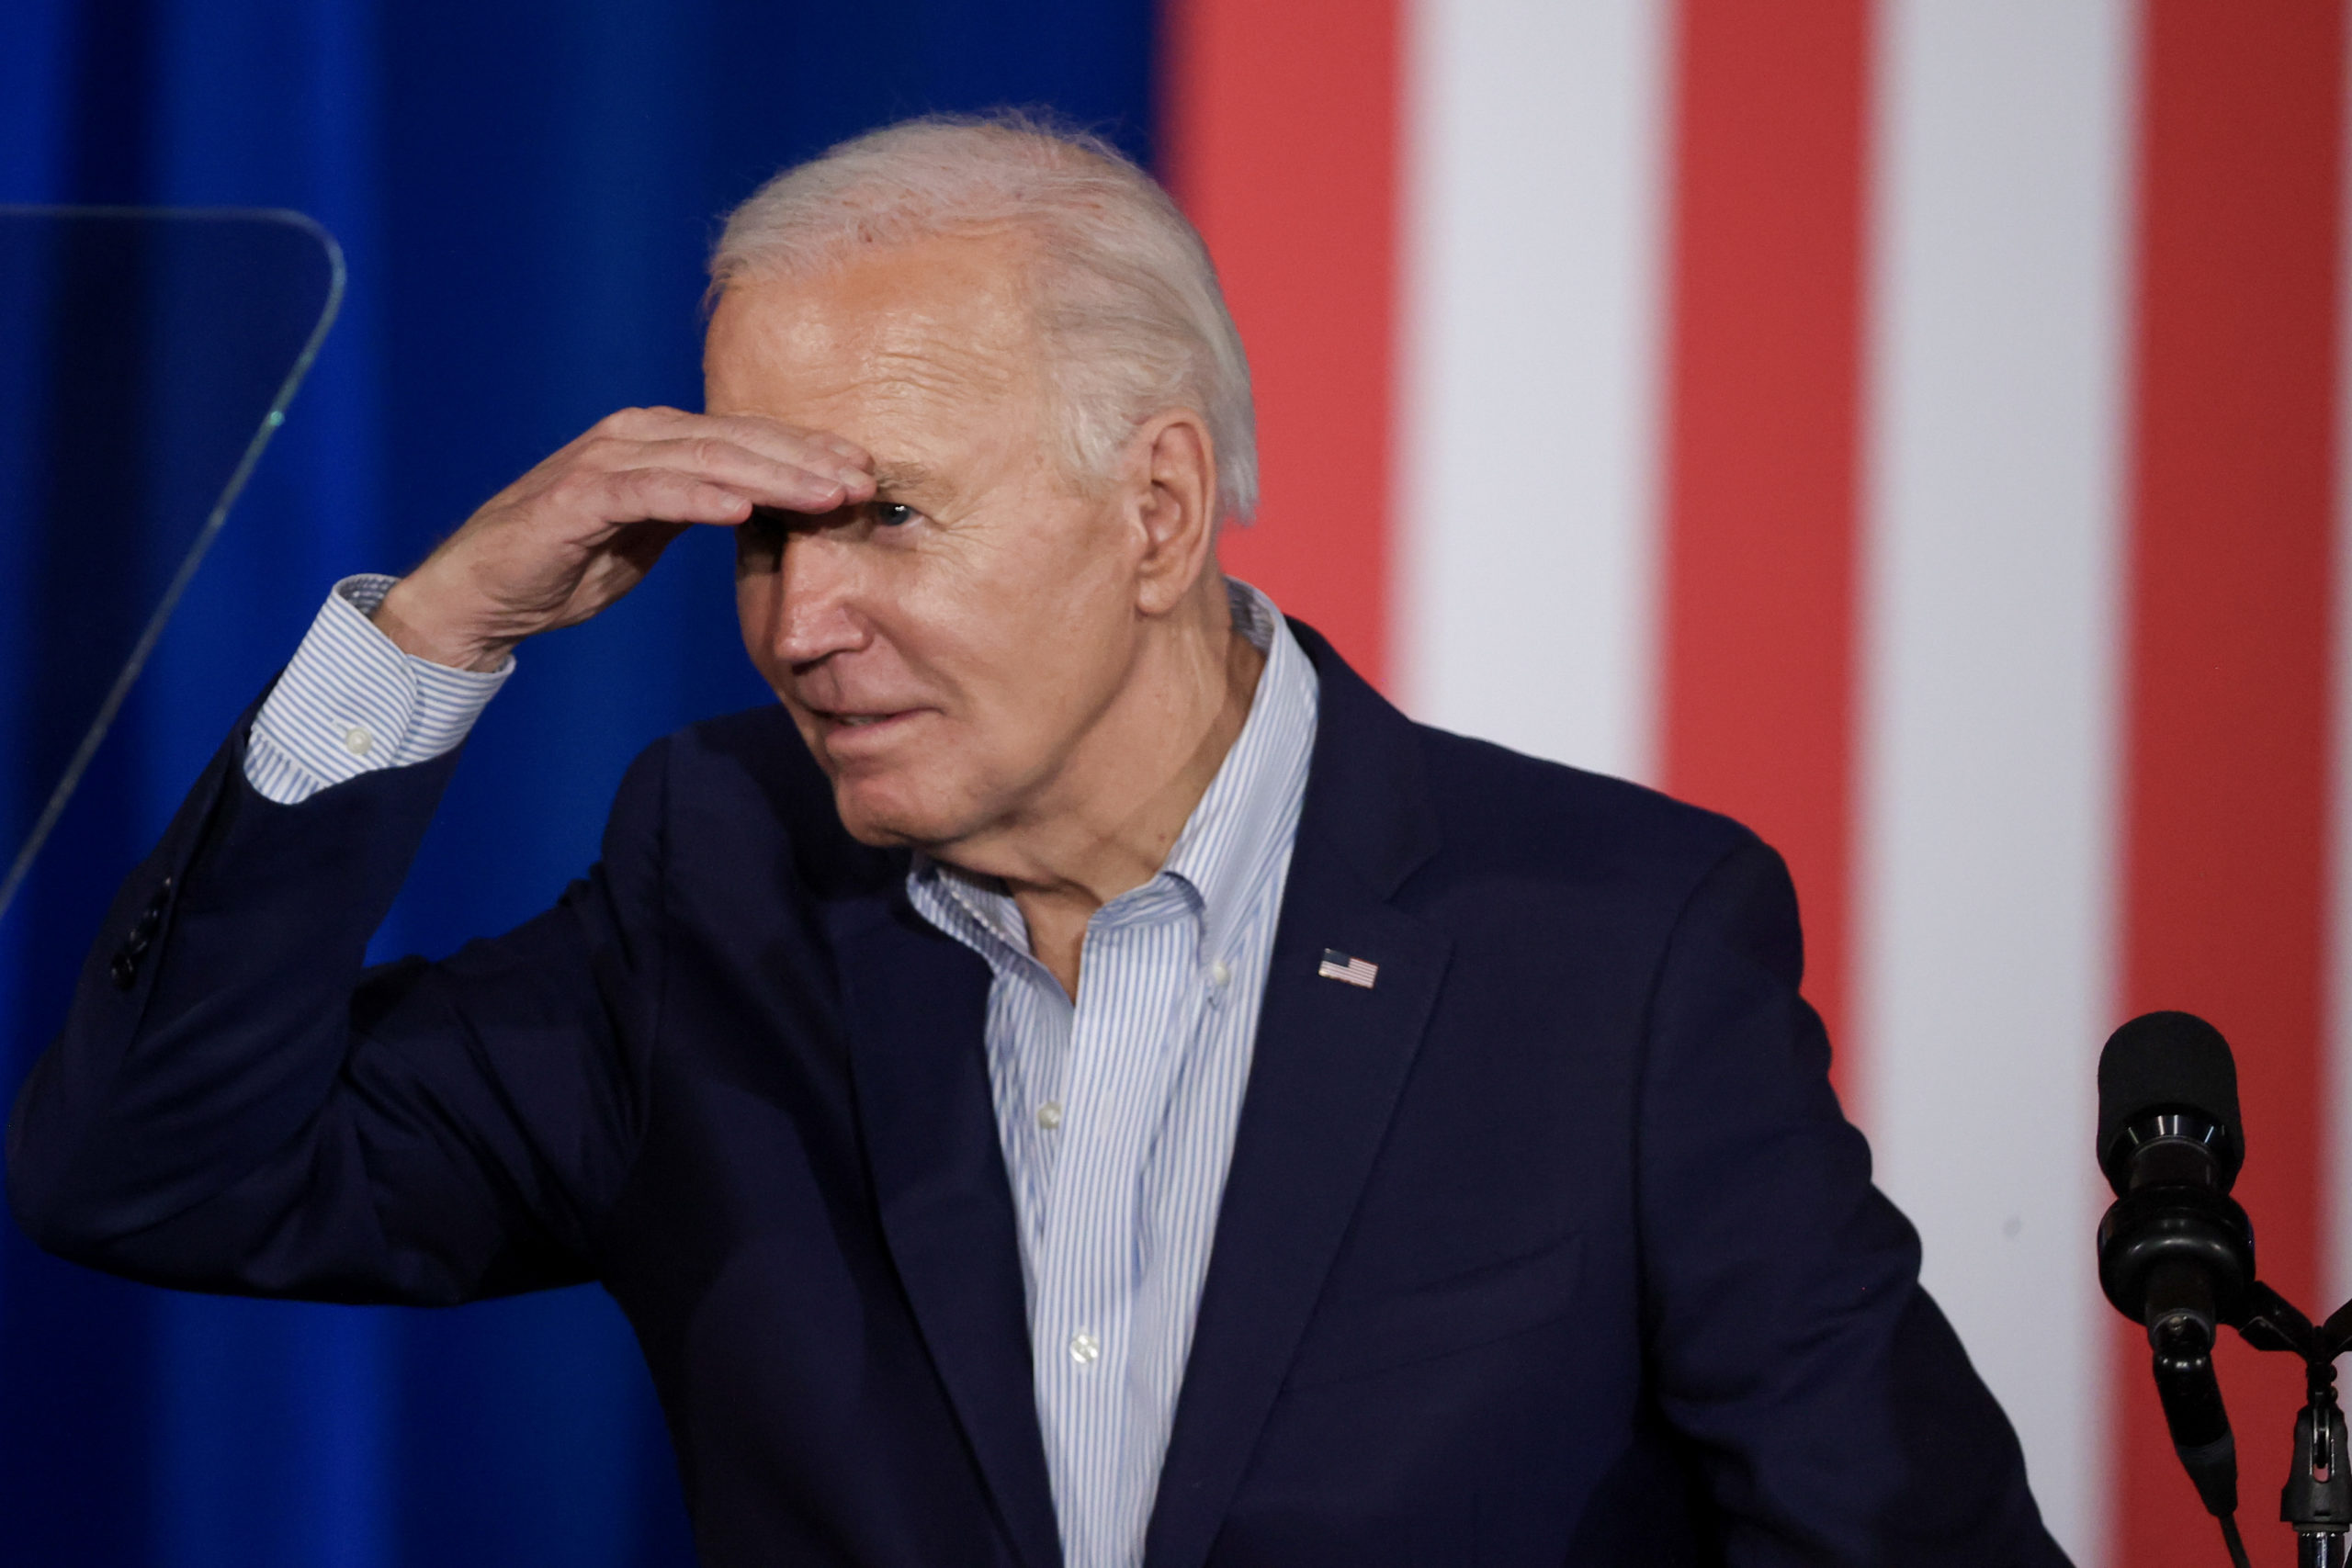 LAS VEGAS, NEVADA - MARCH 19: US President Joe Biden looks out at the crowd while speaking at Stupak Community Center on March 19, 2024 in Las Vegas, Nevada. Biden delivered remarks on making affordable housing more available for American families. (Photo by Ian Maule/Getty Images)